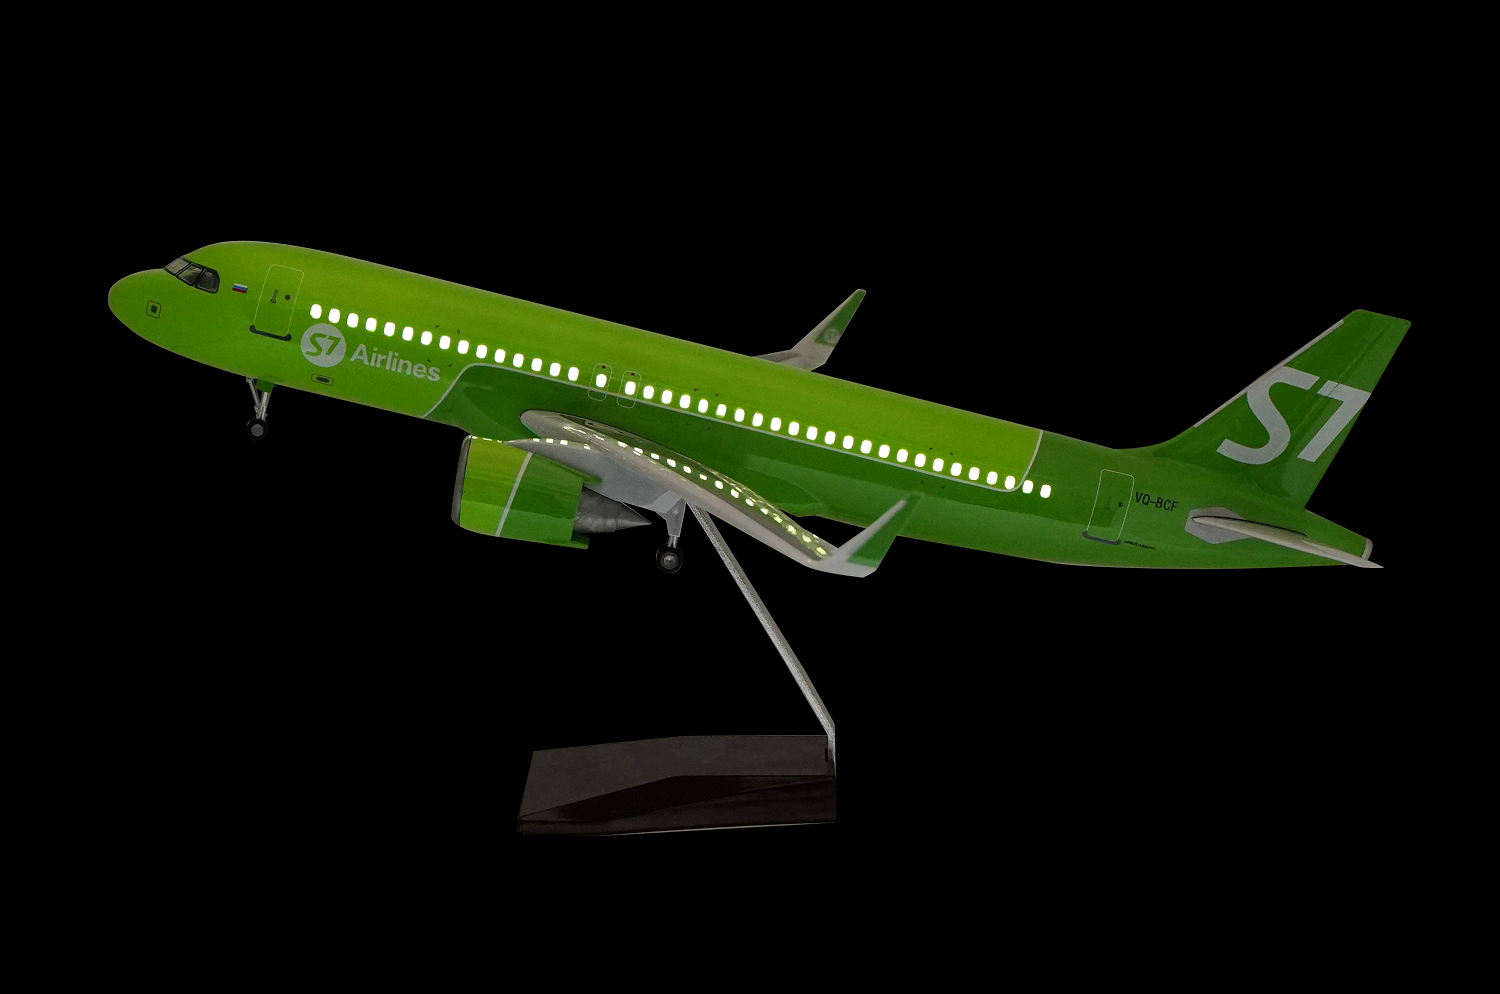   Airbus A320 Neo,  S7 Airlines .    .  # 6 hobbyplus.ru